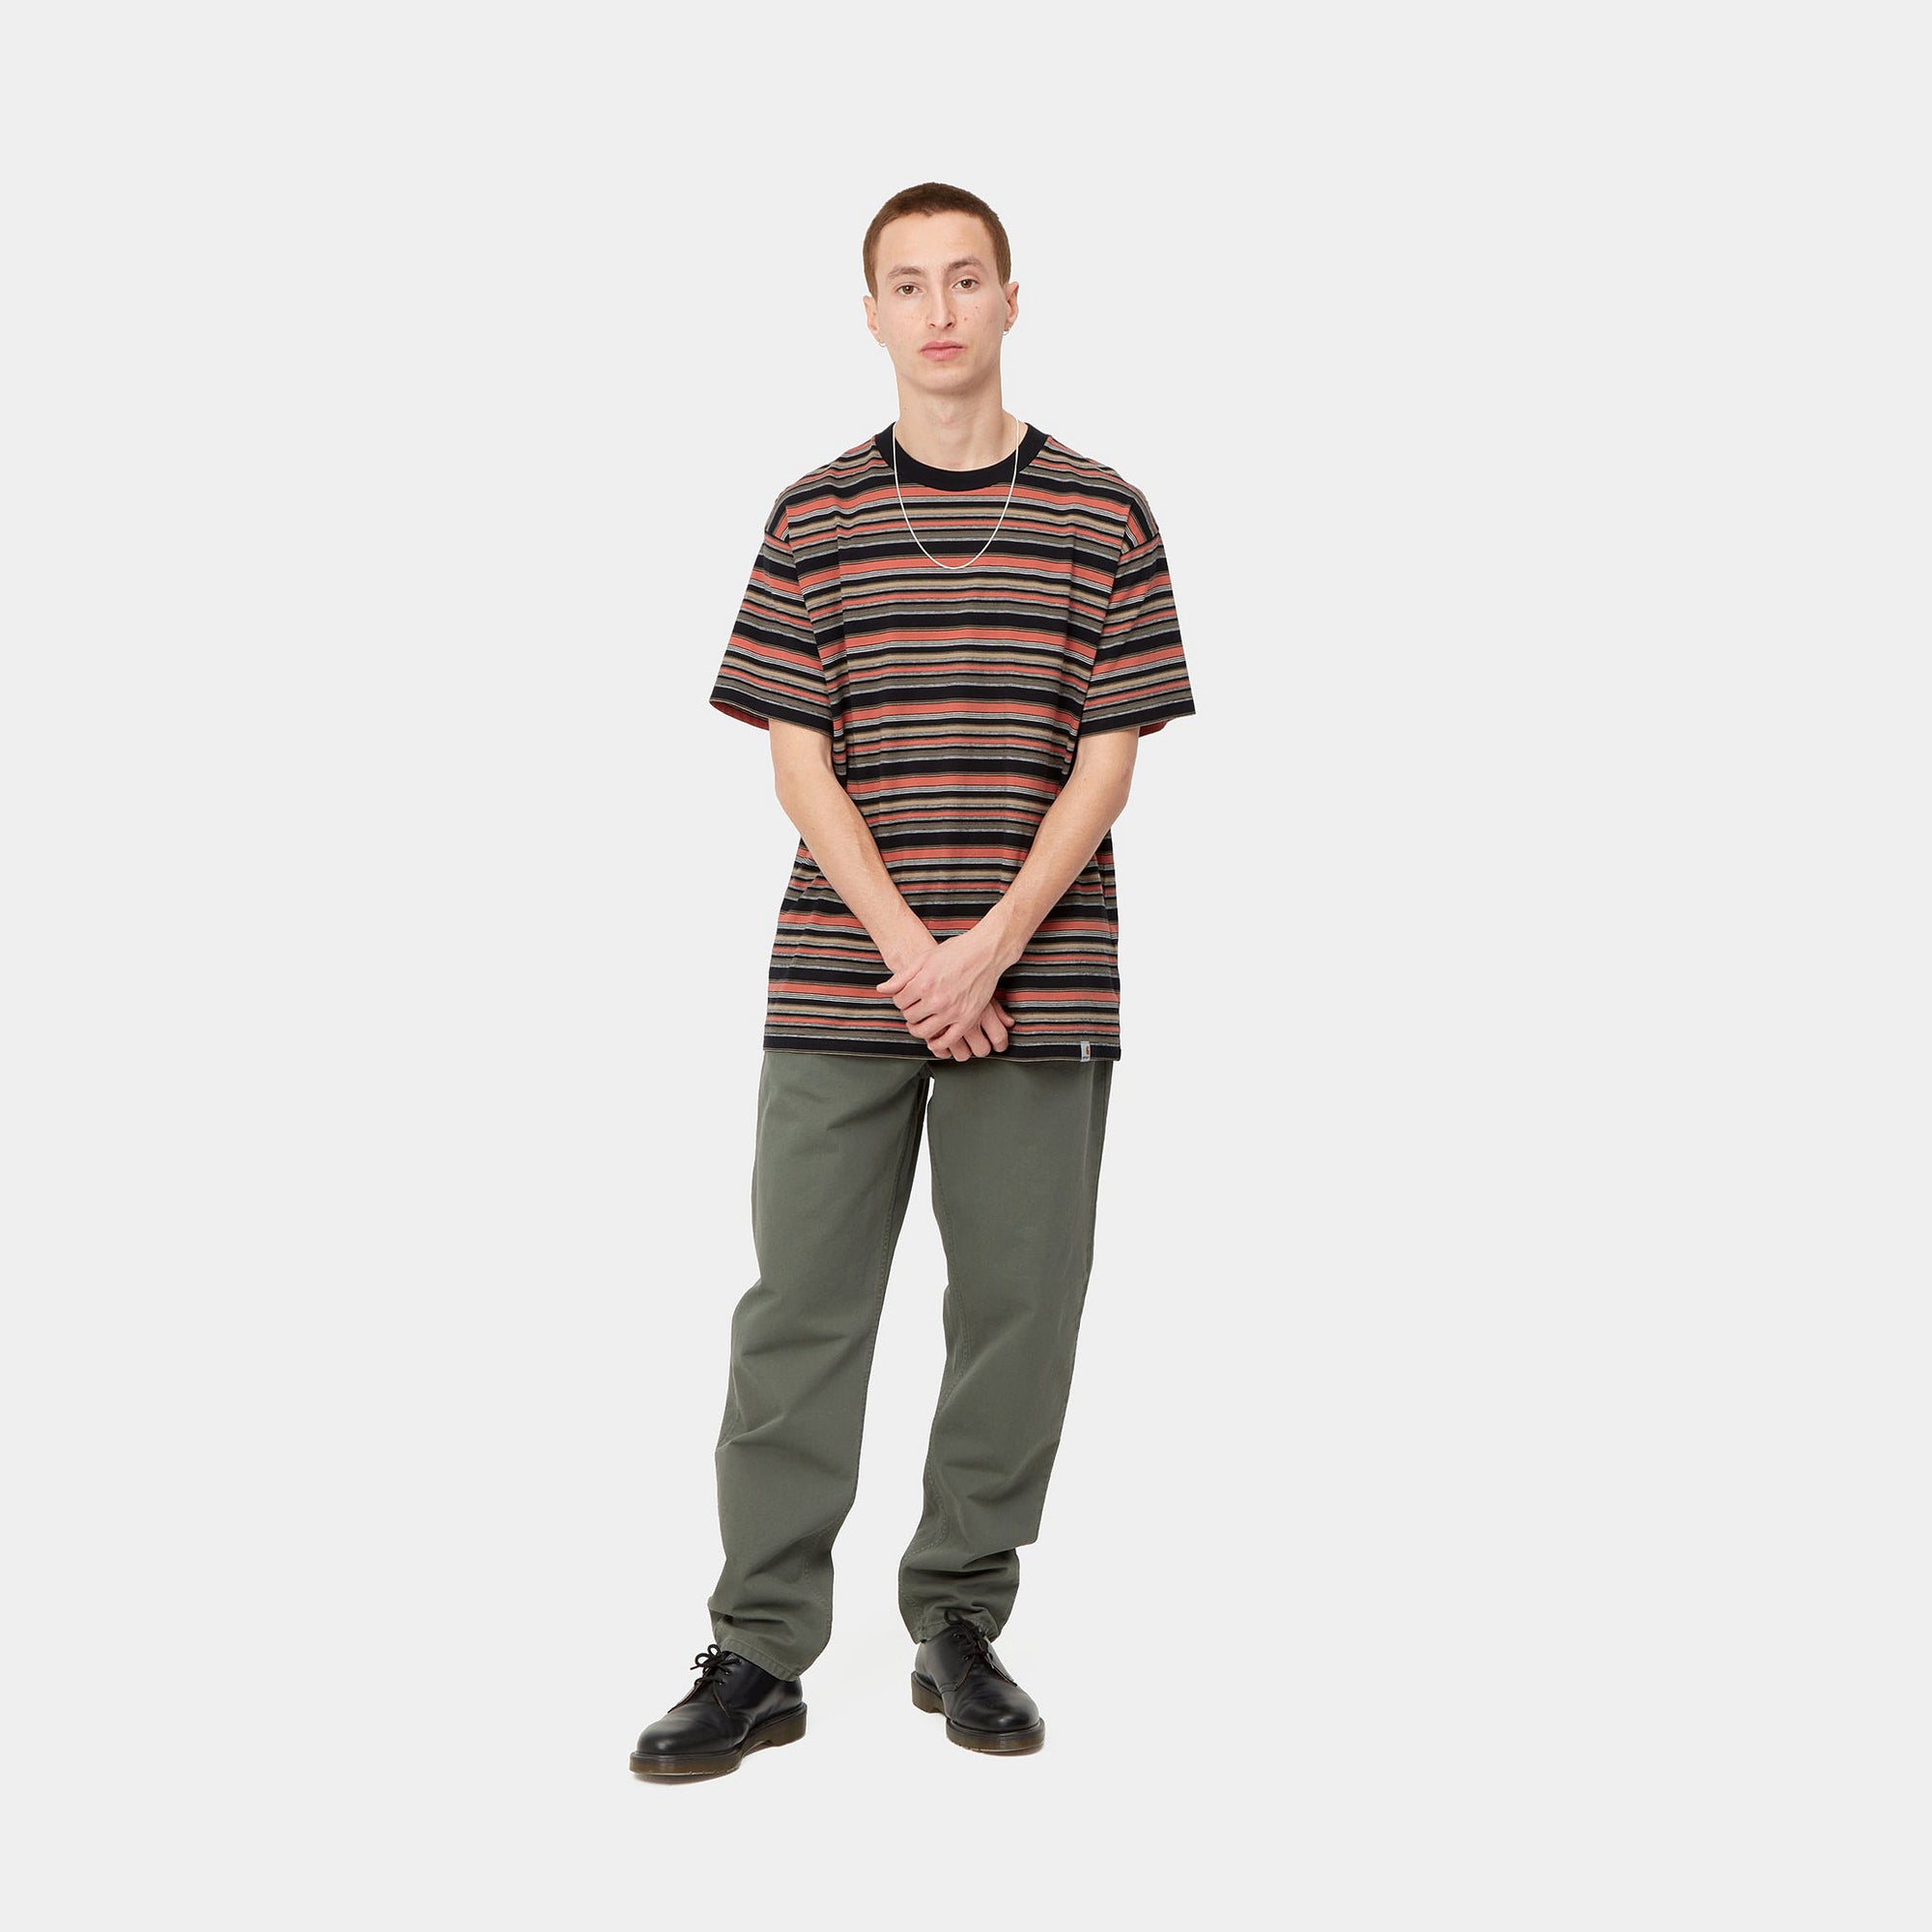 Carhartt WIP riggs stripe Tee カーハート S - Tシャツ/カットソー ...